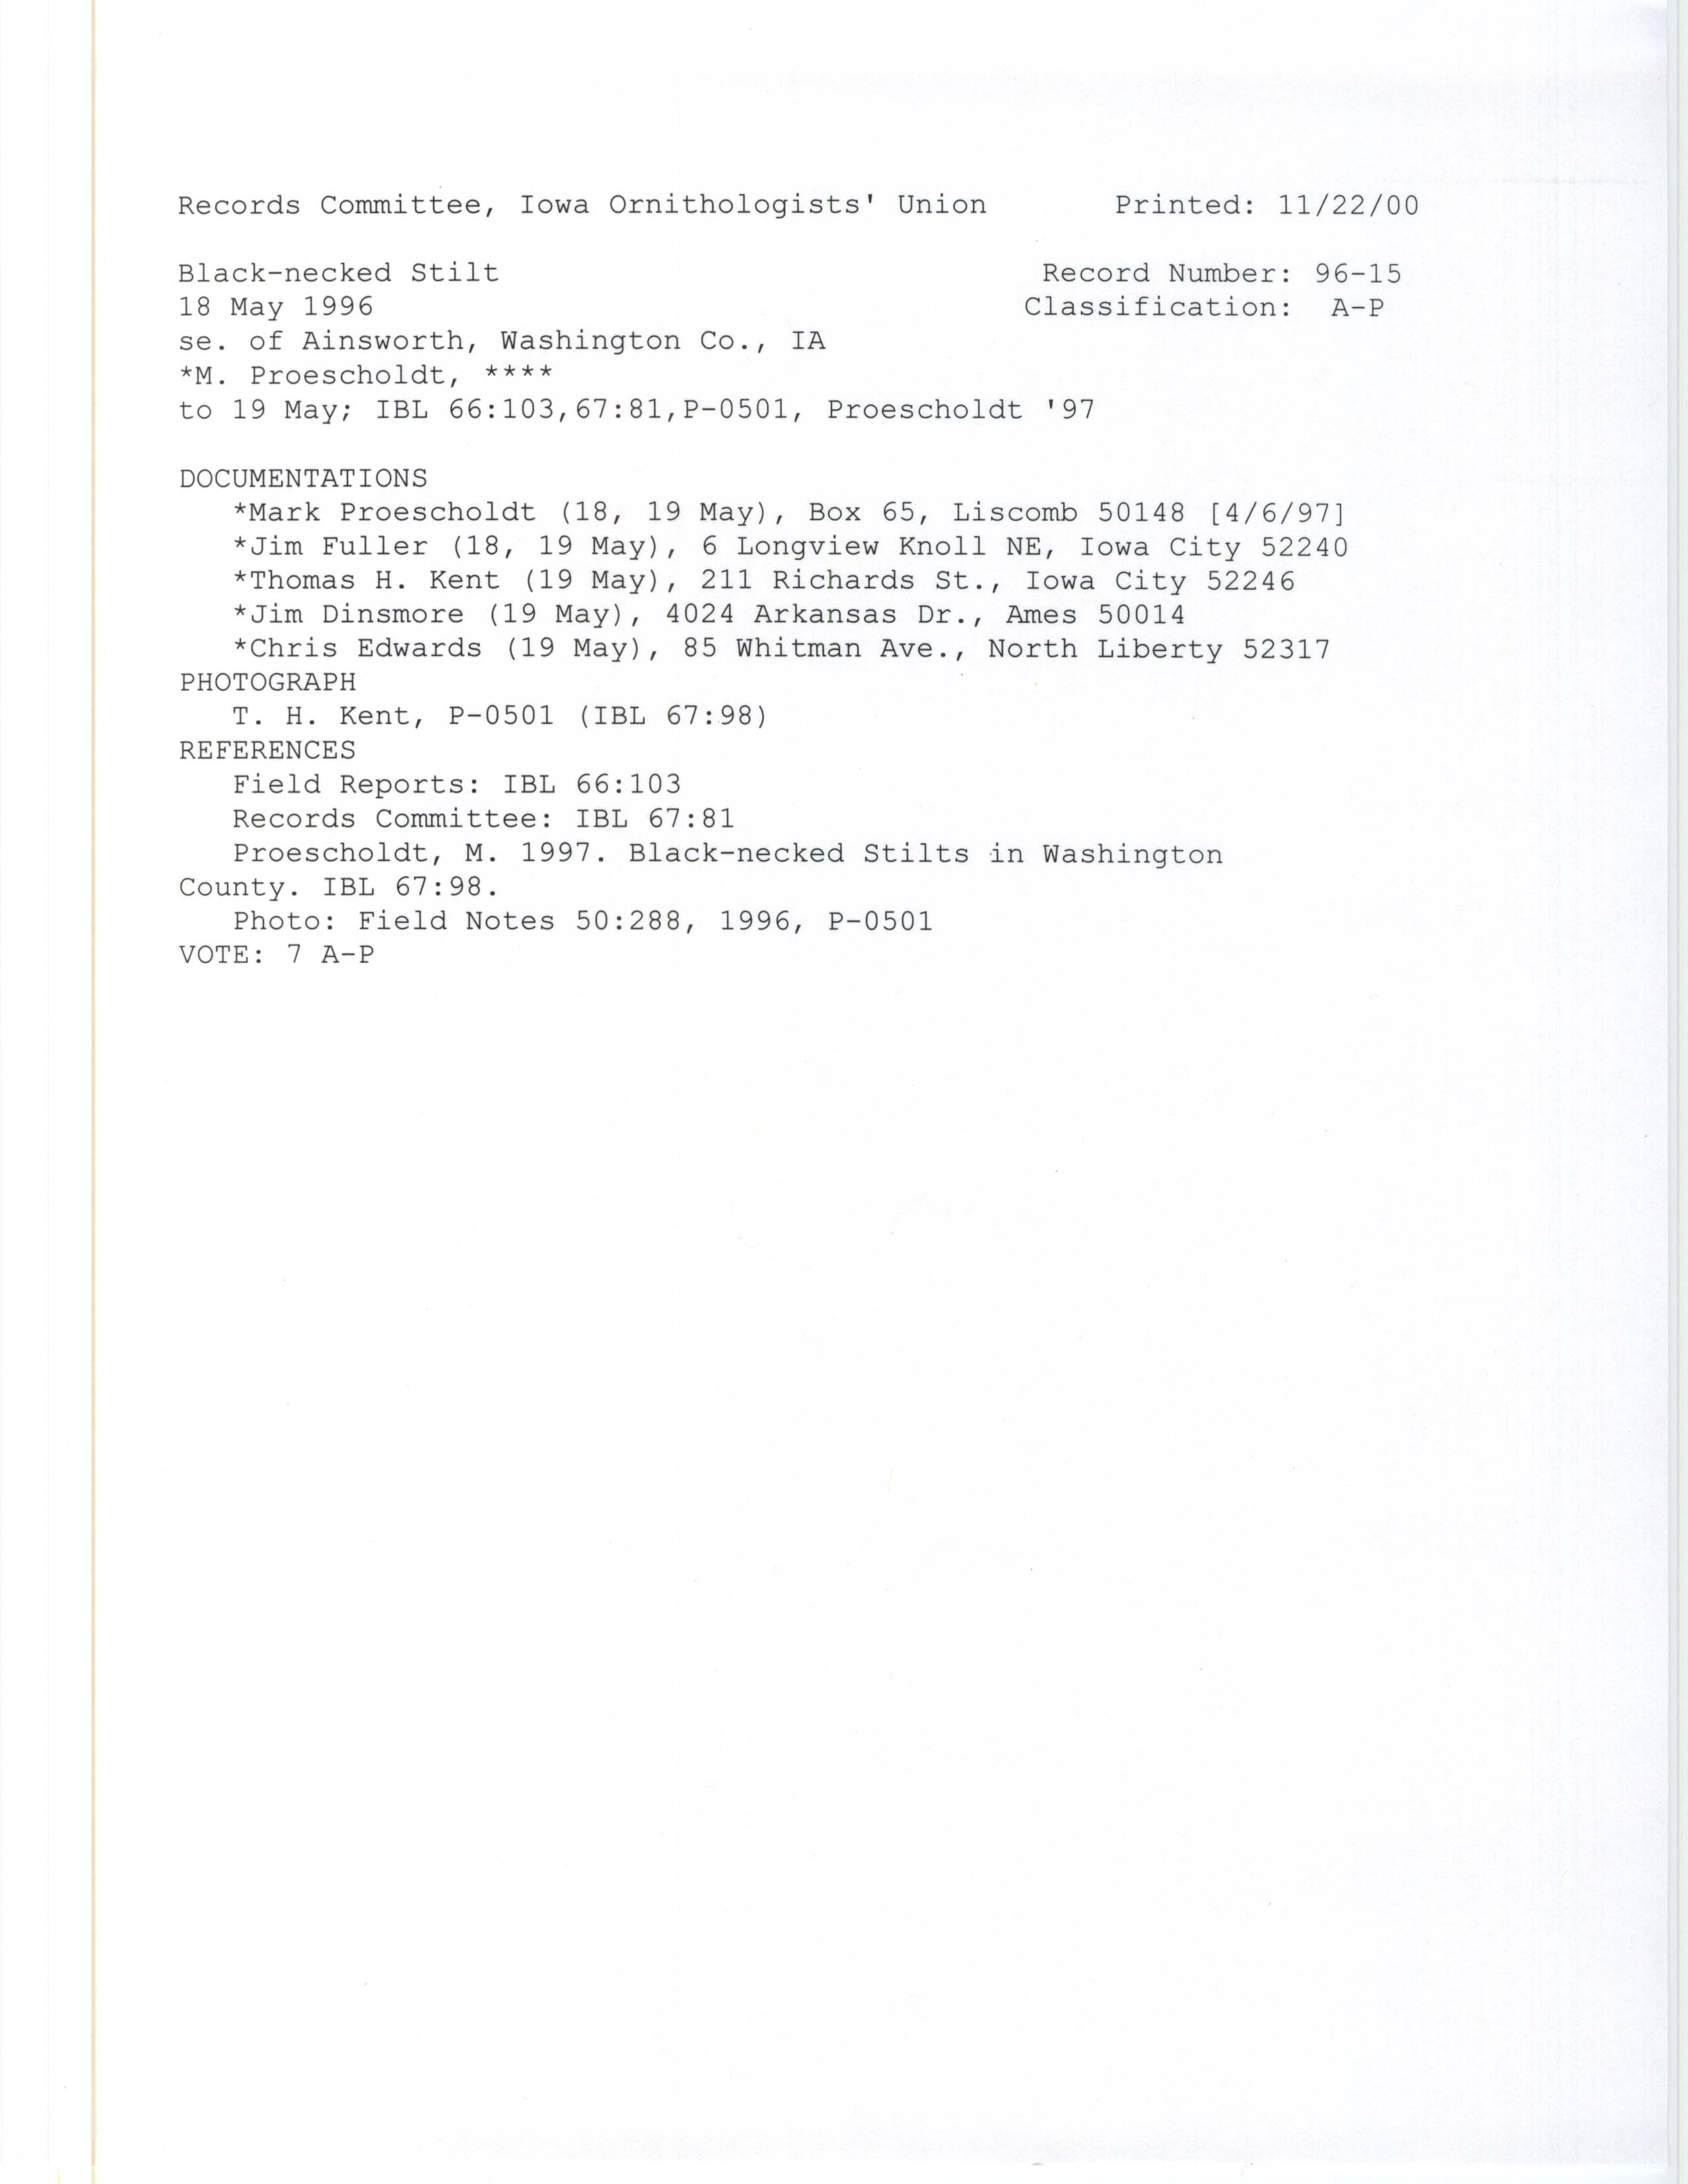 Records Committee review for rare bird sighting of Black-necked Stilt south of Ainsworth, 1996